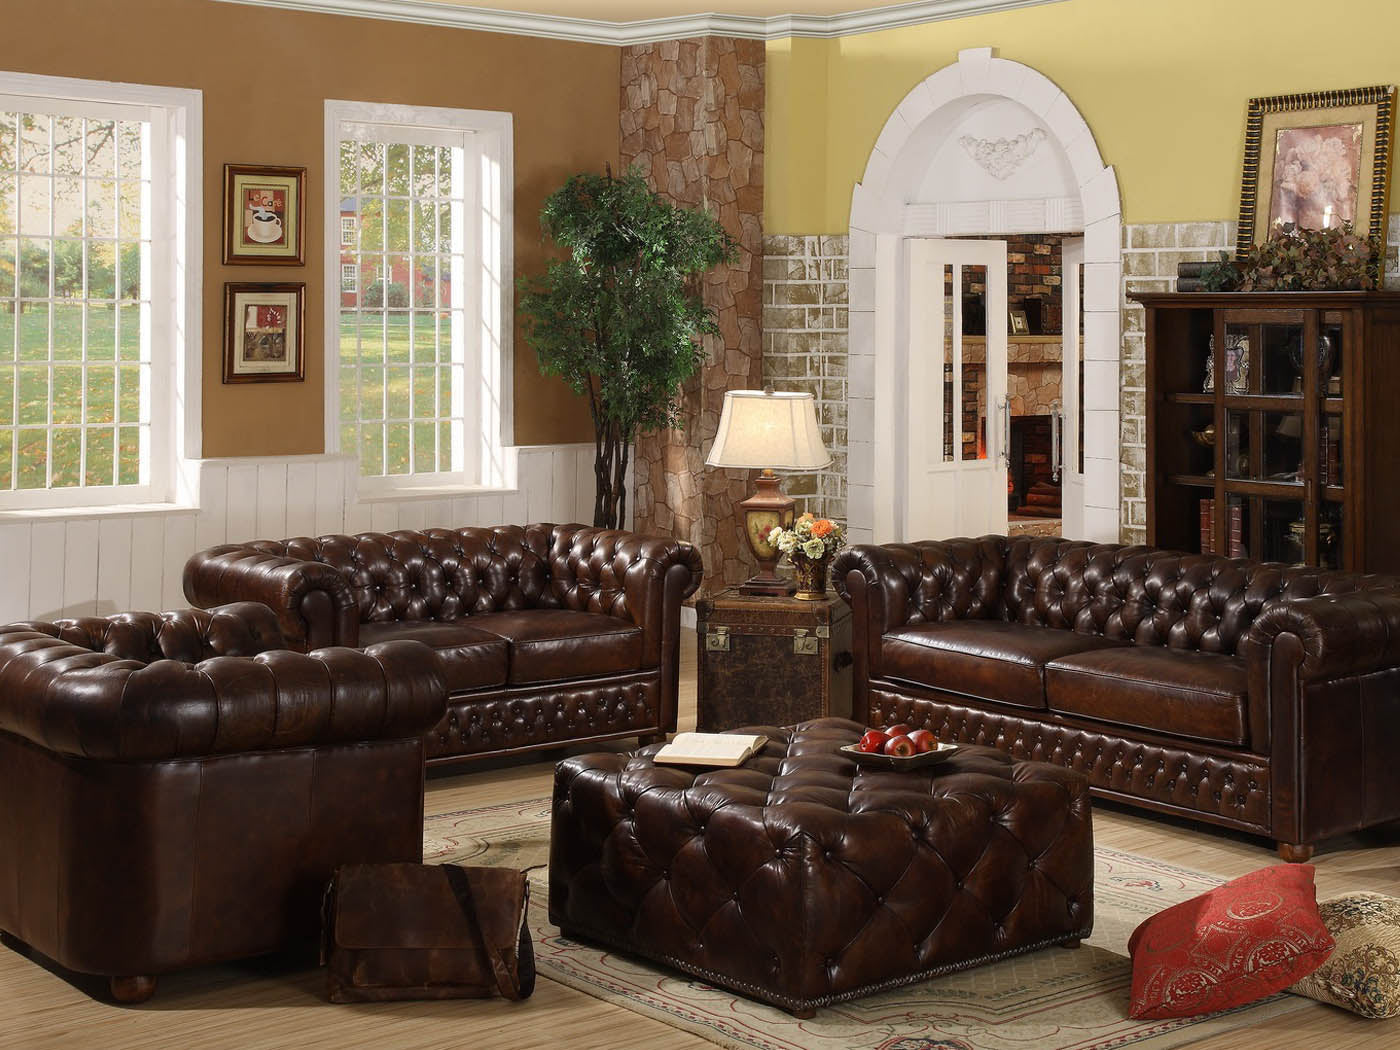 Image of a luxurious Chesterfield sofa in rich, deep leather upholstery, adding sophistication to the living room